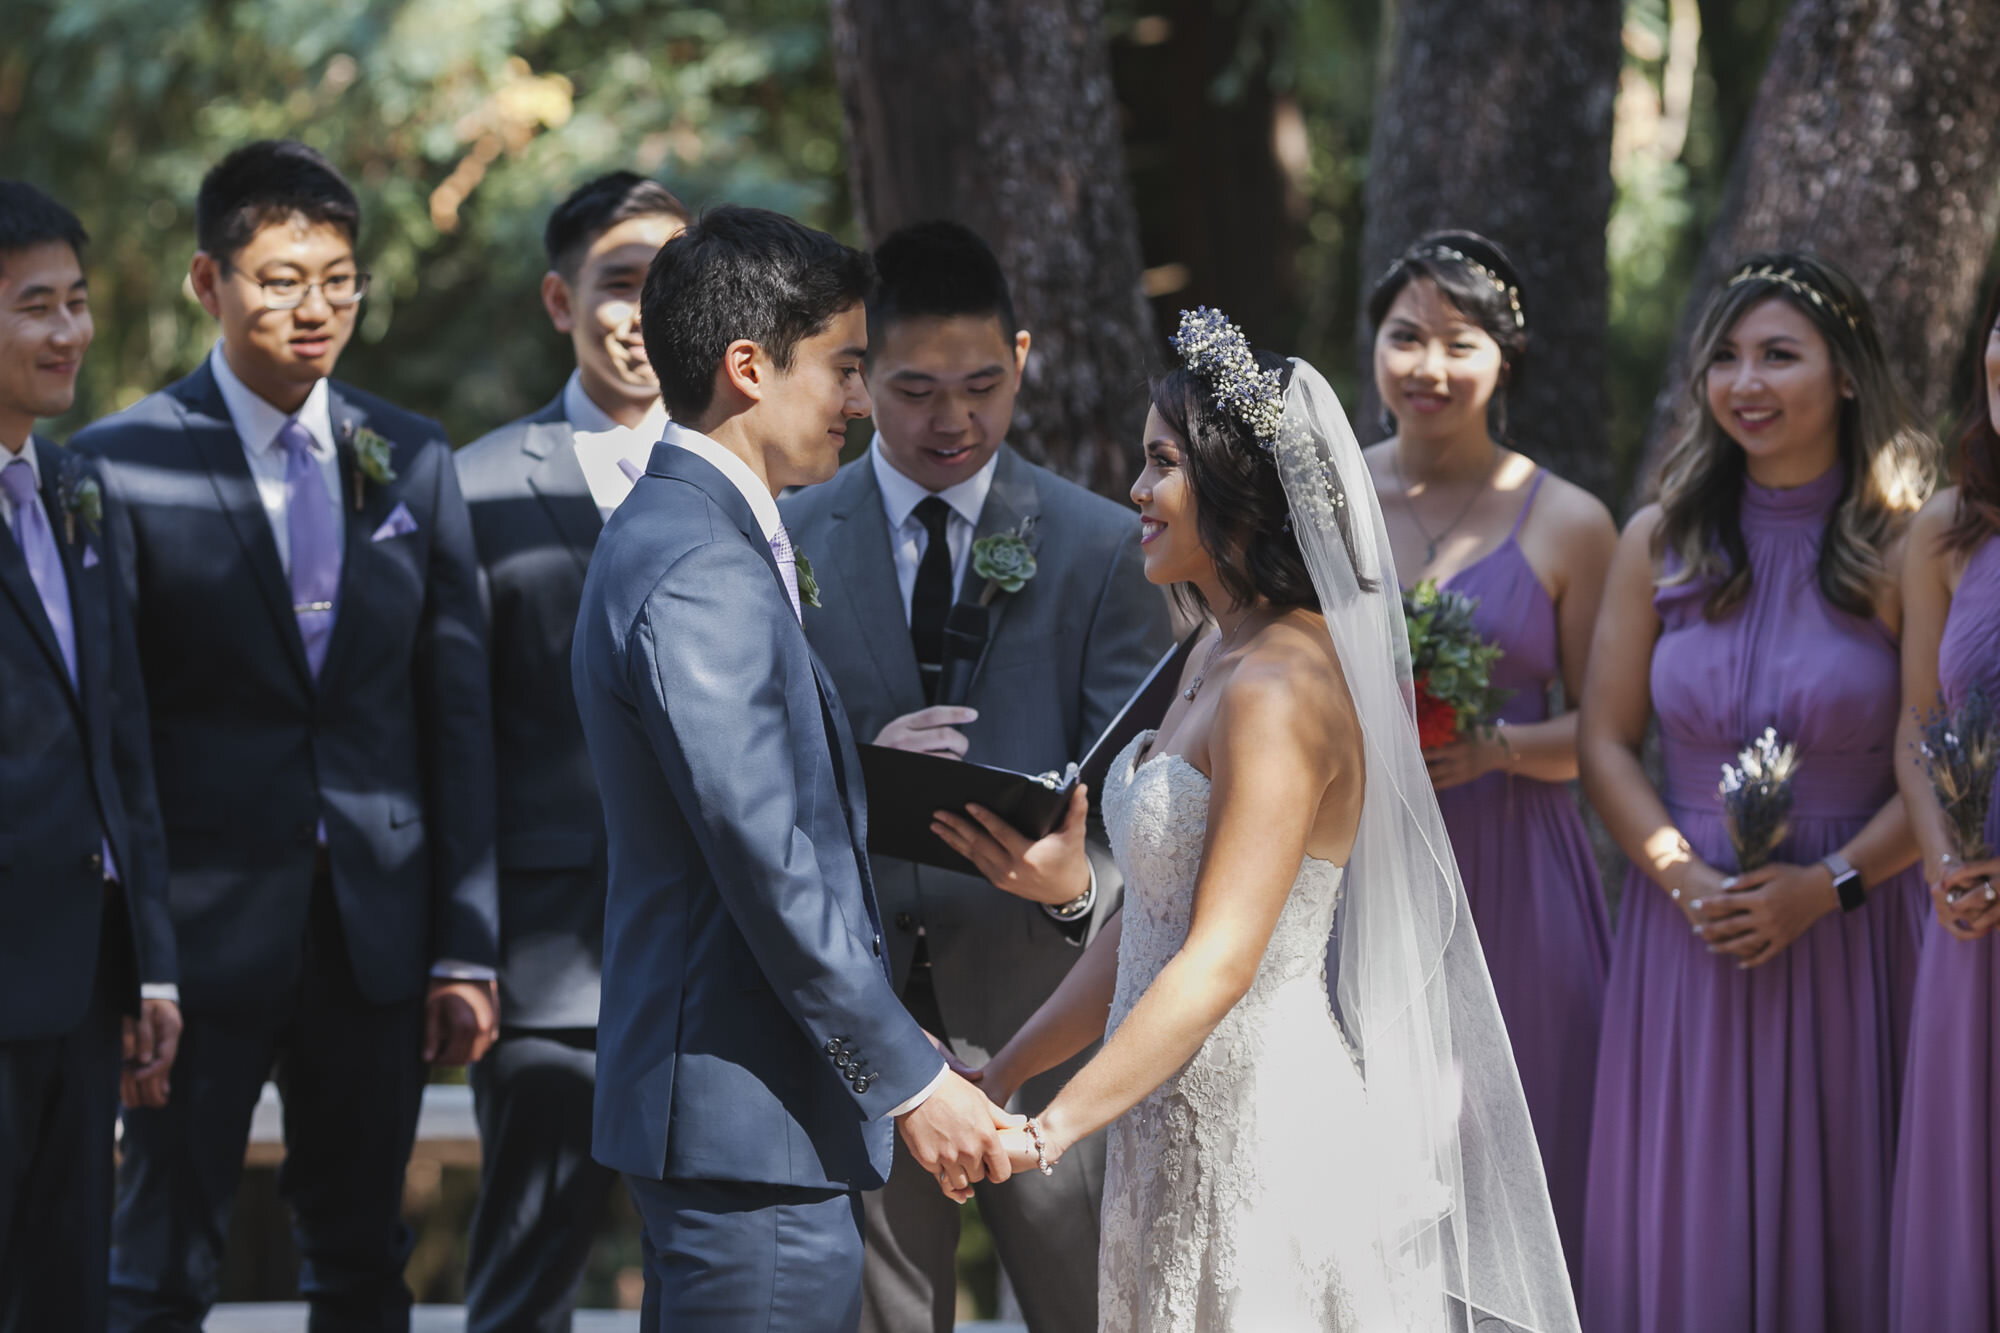 Bride and groom exchange vows on their wedding day